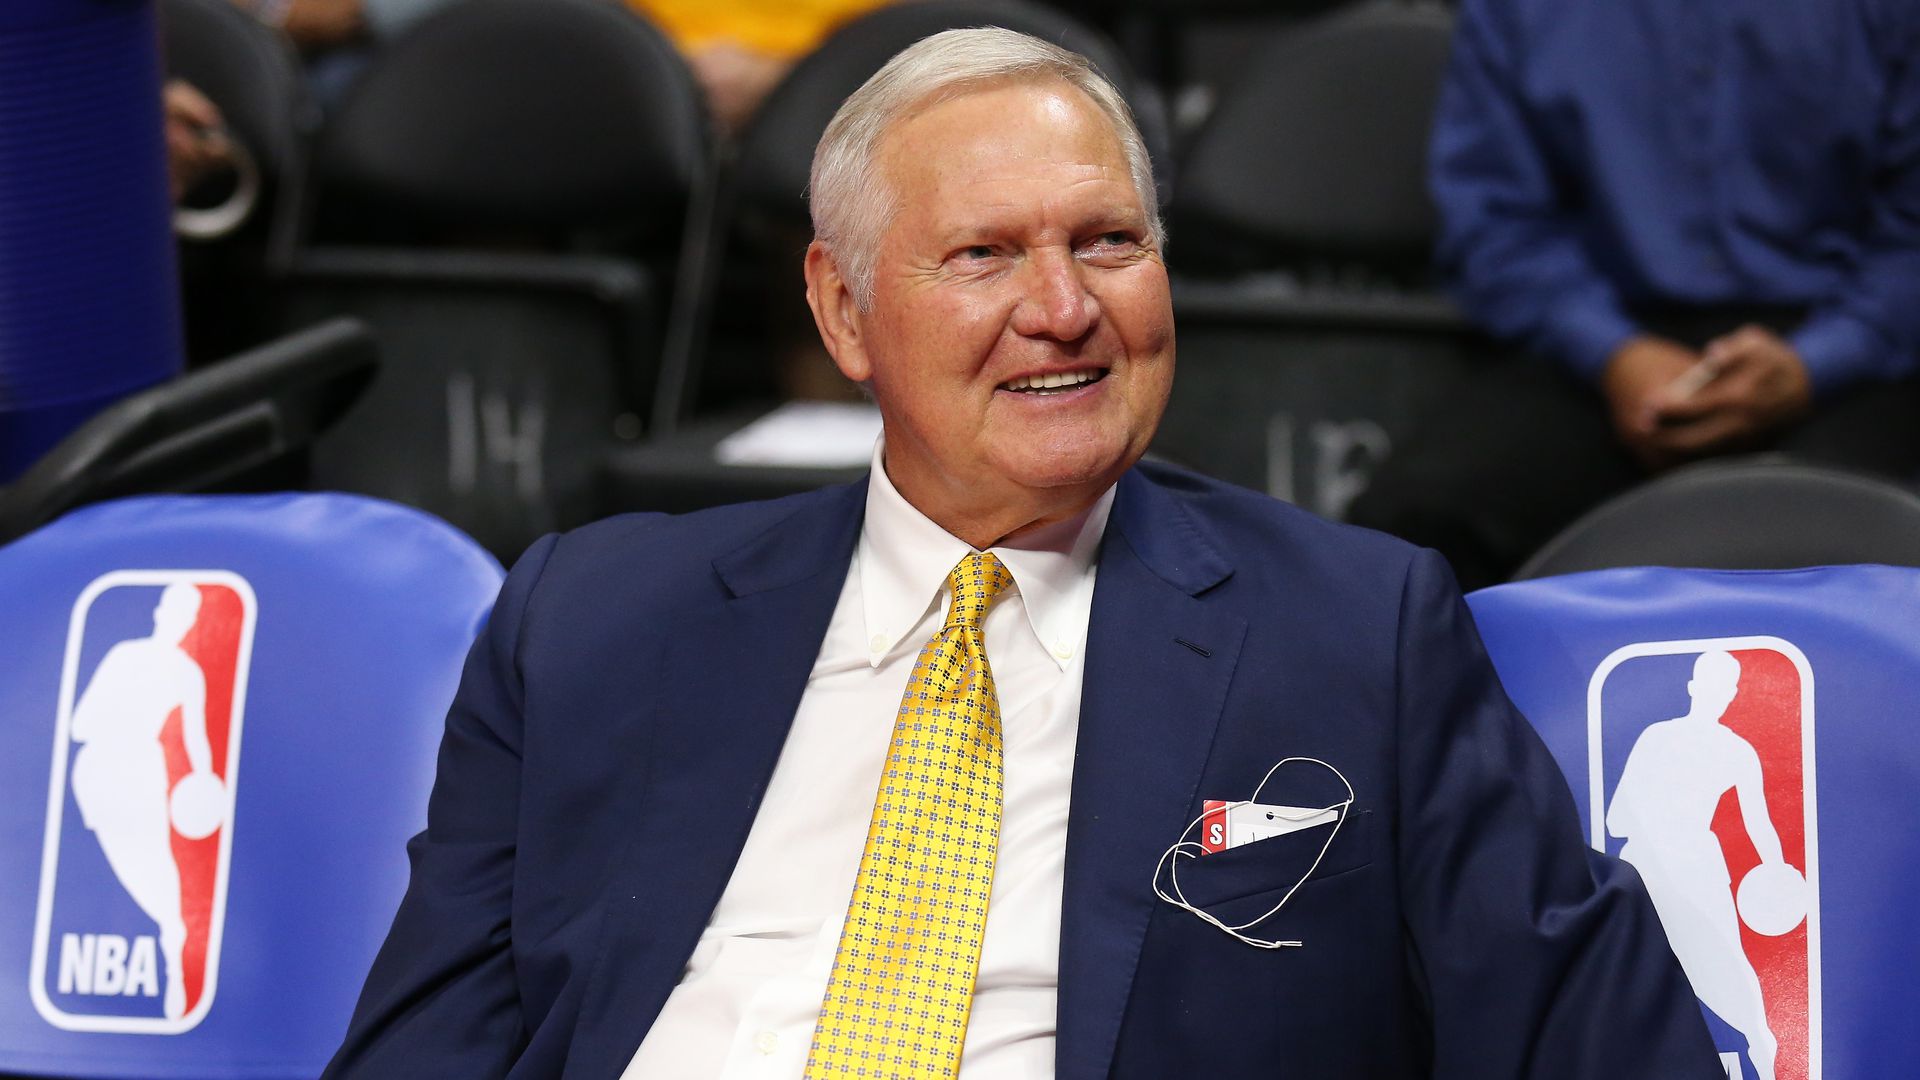 Jerry West of NBA receives the President Medal of Freedom